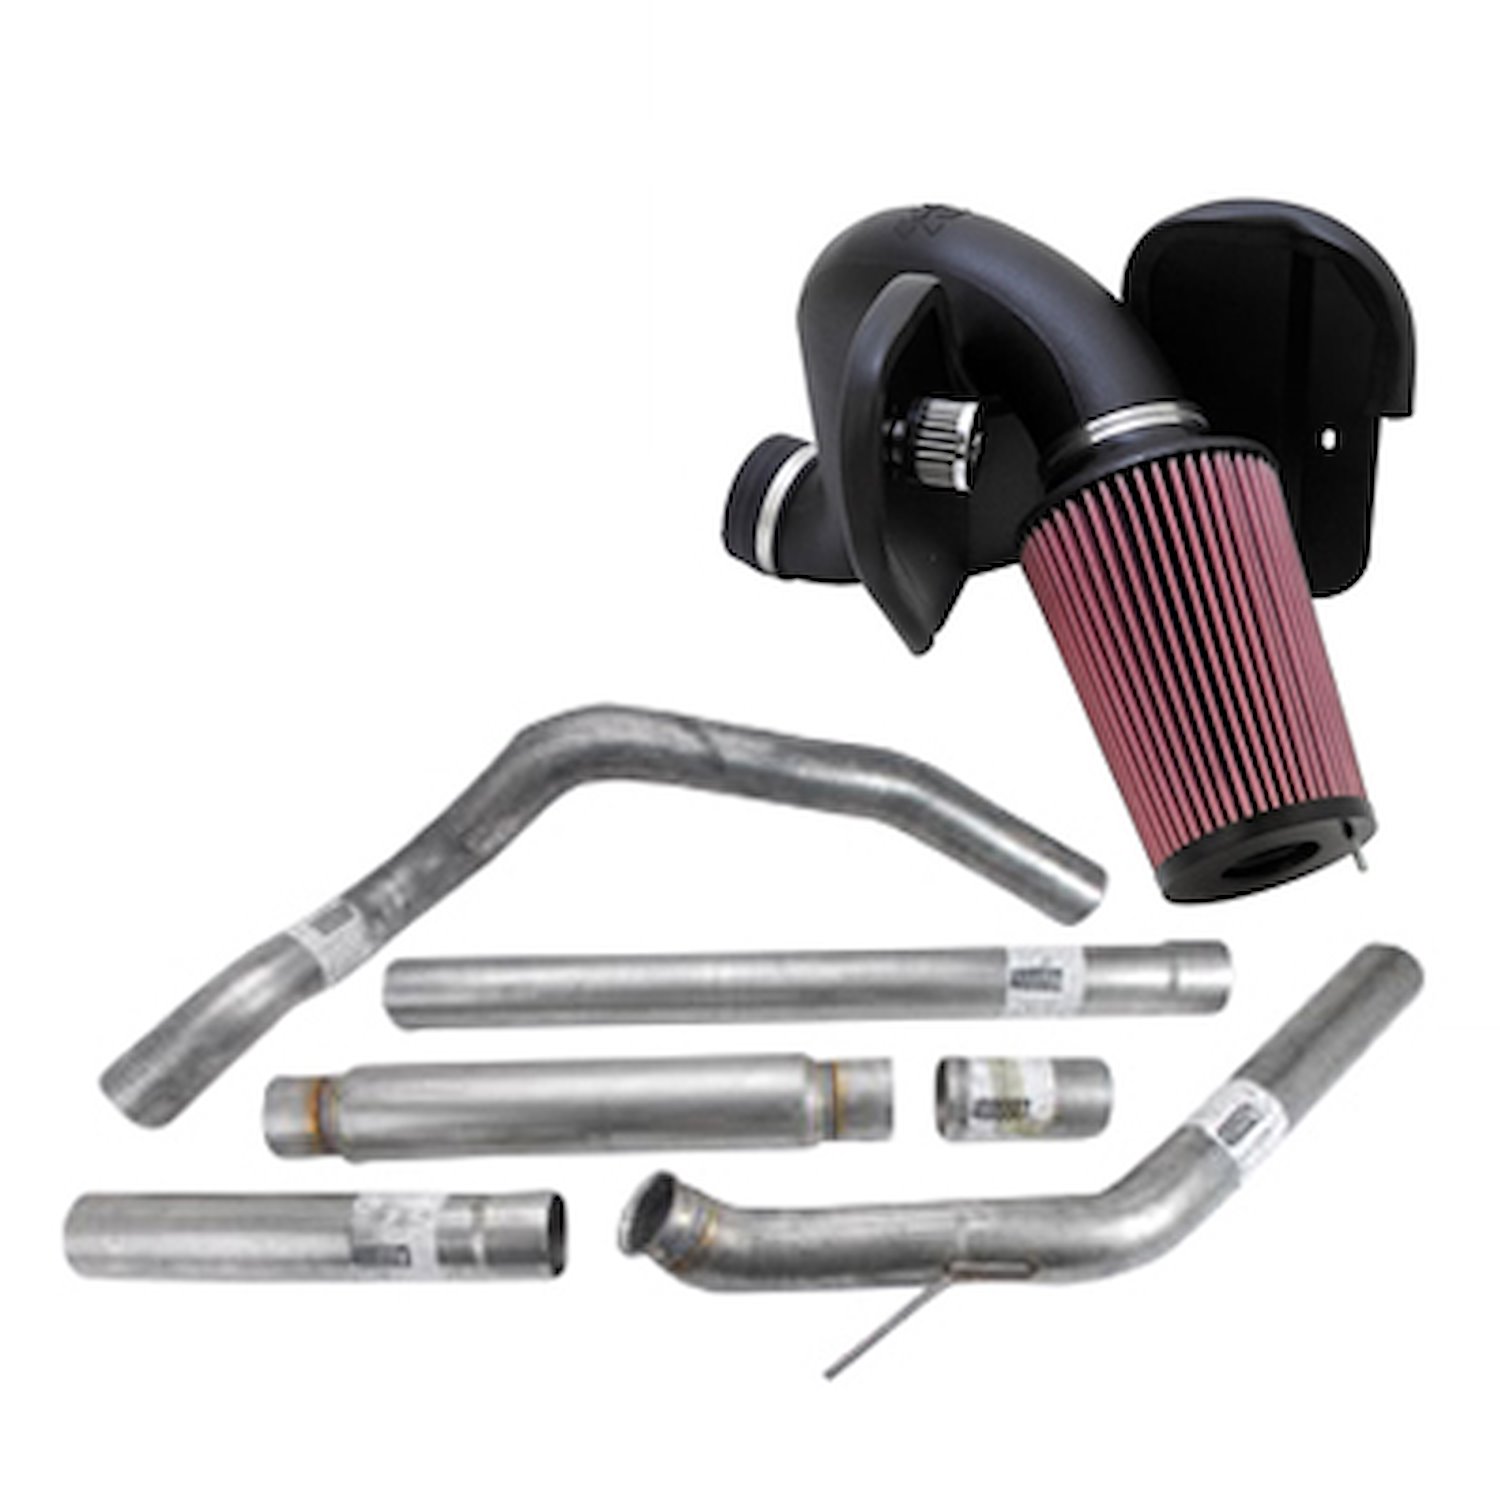 K&N FIPK Cold Air Intake with JEGS Exhaust System 2003-2007 Dodge Ram 2500/3500 5.9L Diesel